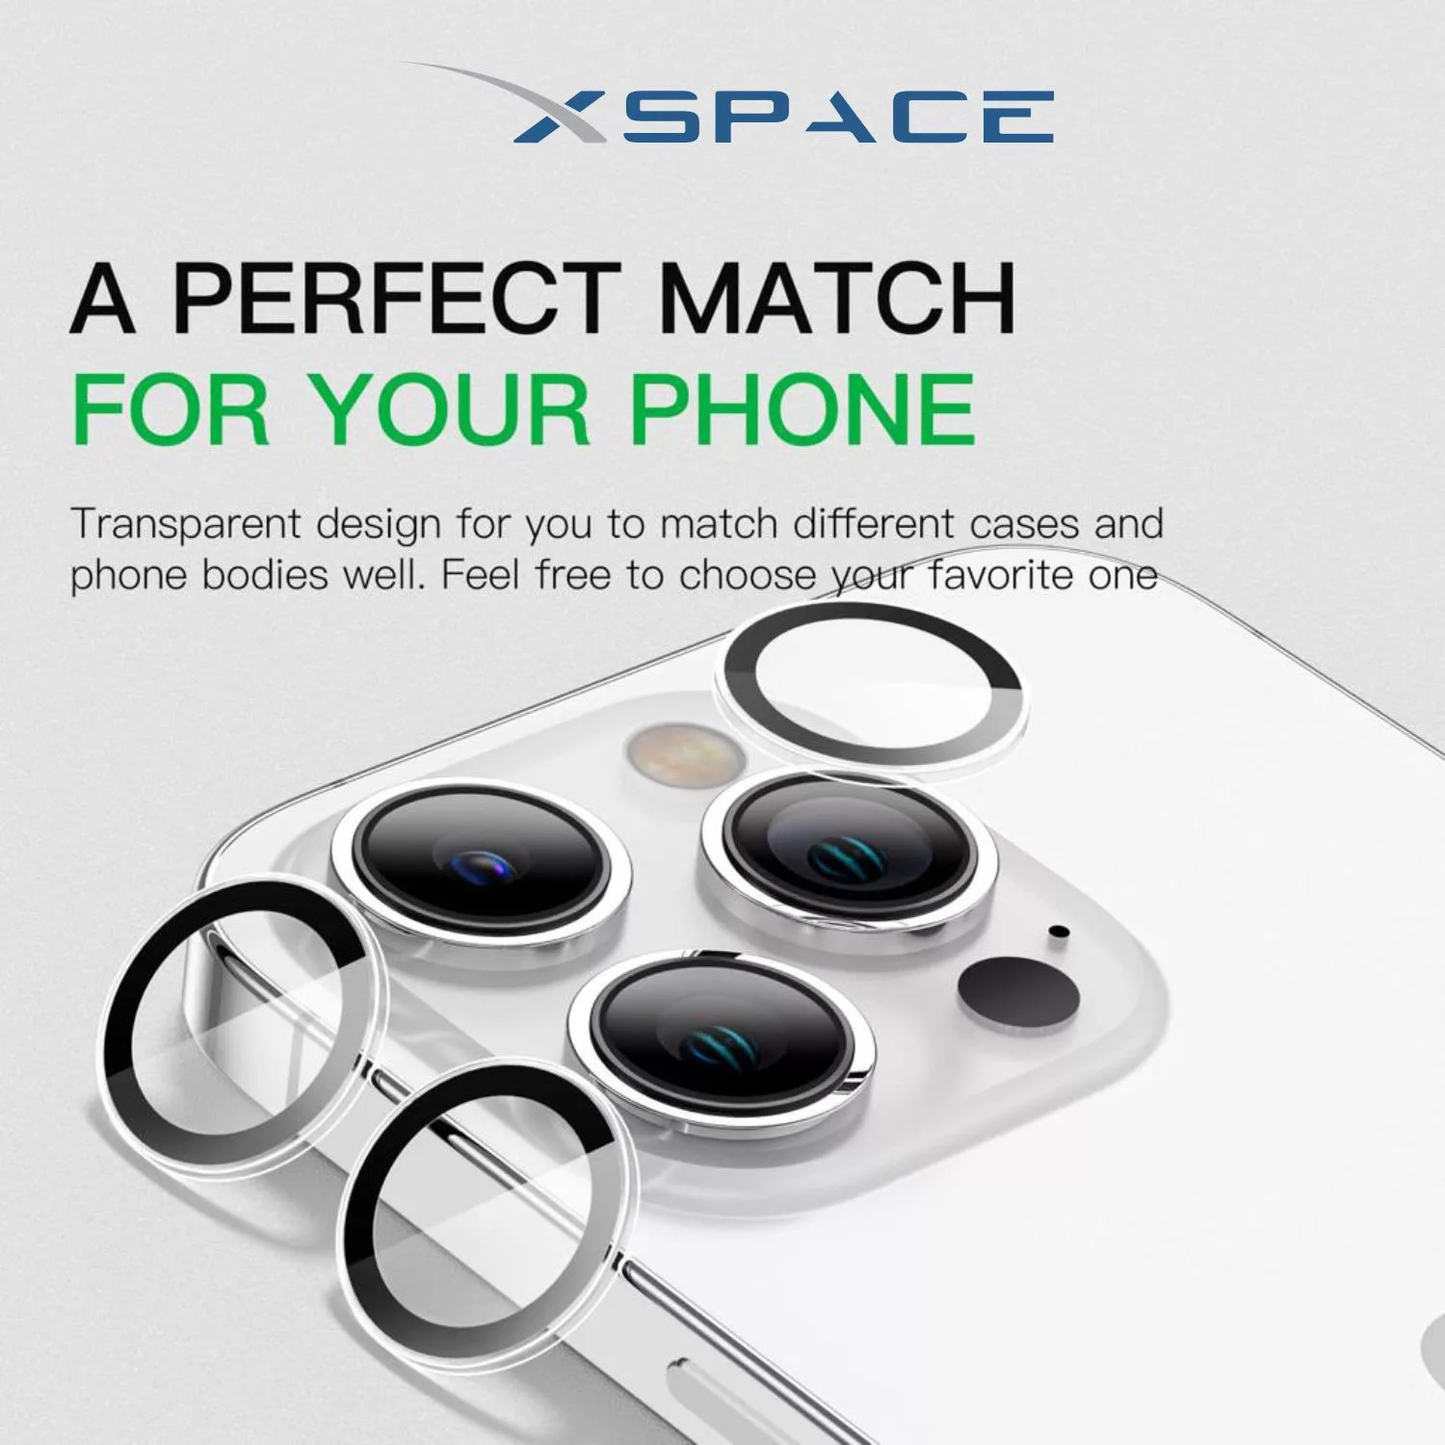 Raopro XSPACE Camera Lens Glass for iPhone 14 Pro/Pro Max - Silver